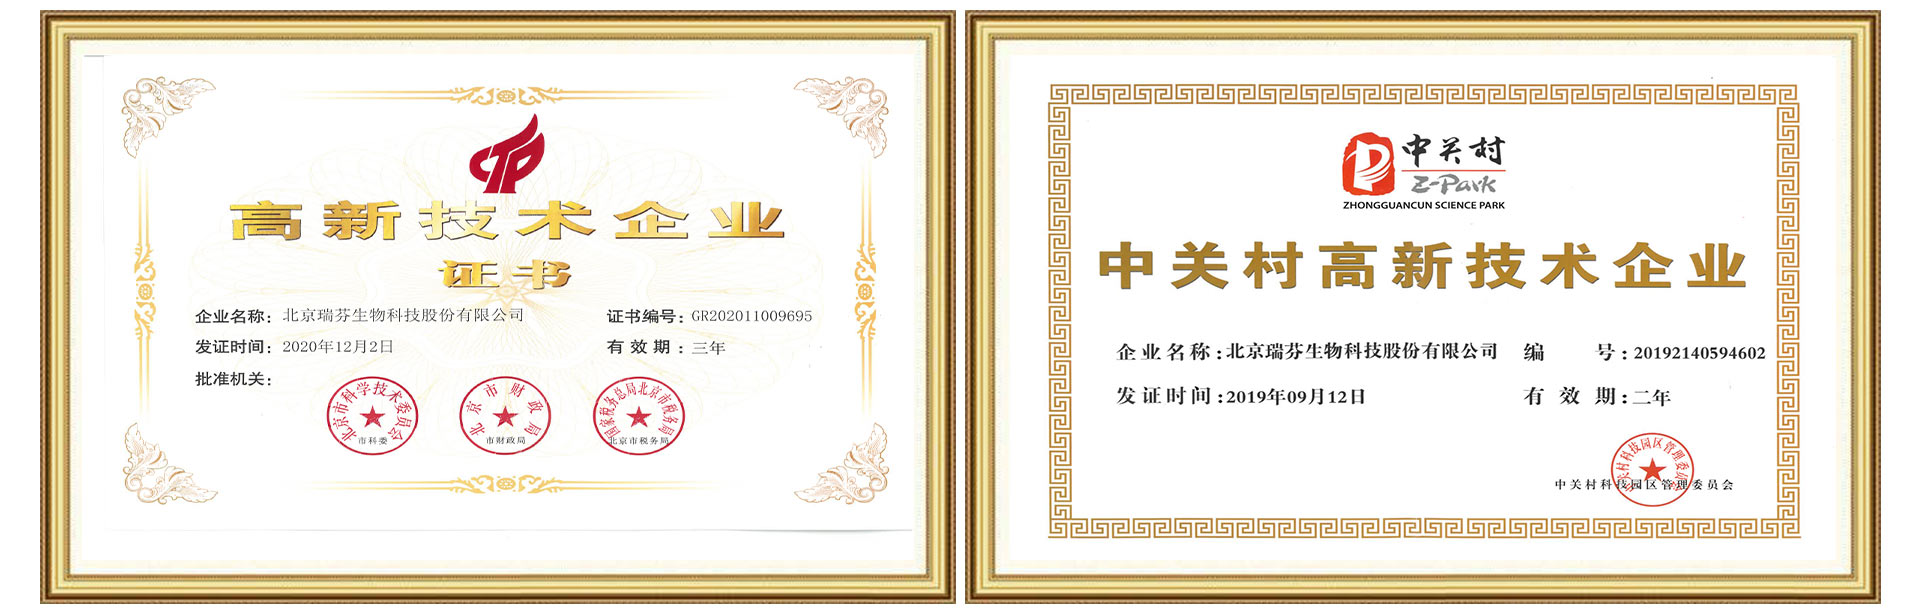 Refine Biology has been granted as China National High and New Technology Enterprise(圖1)